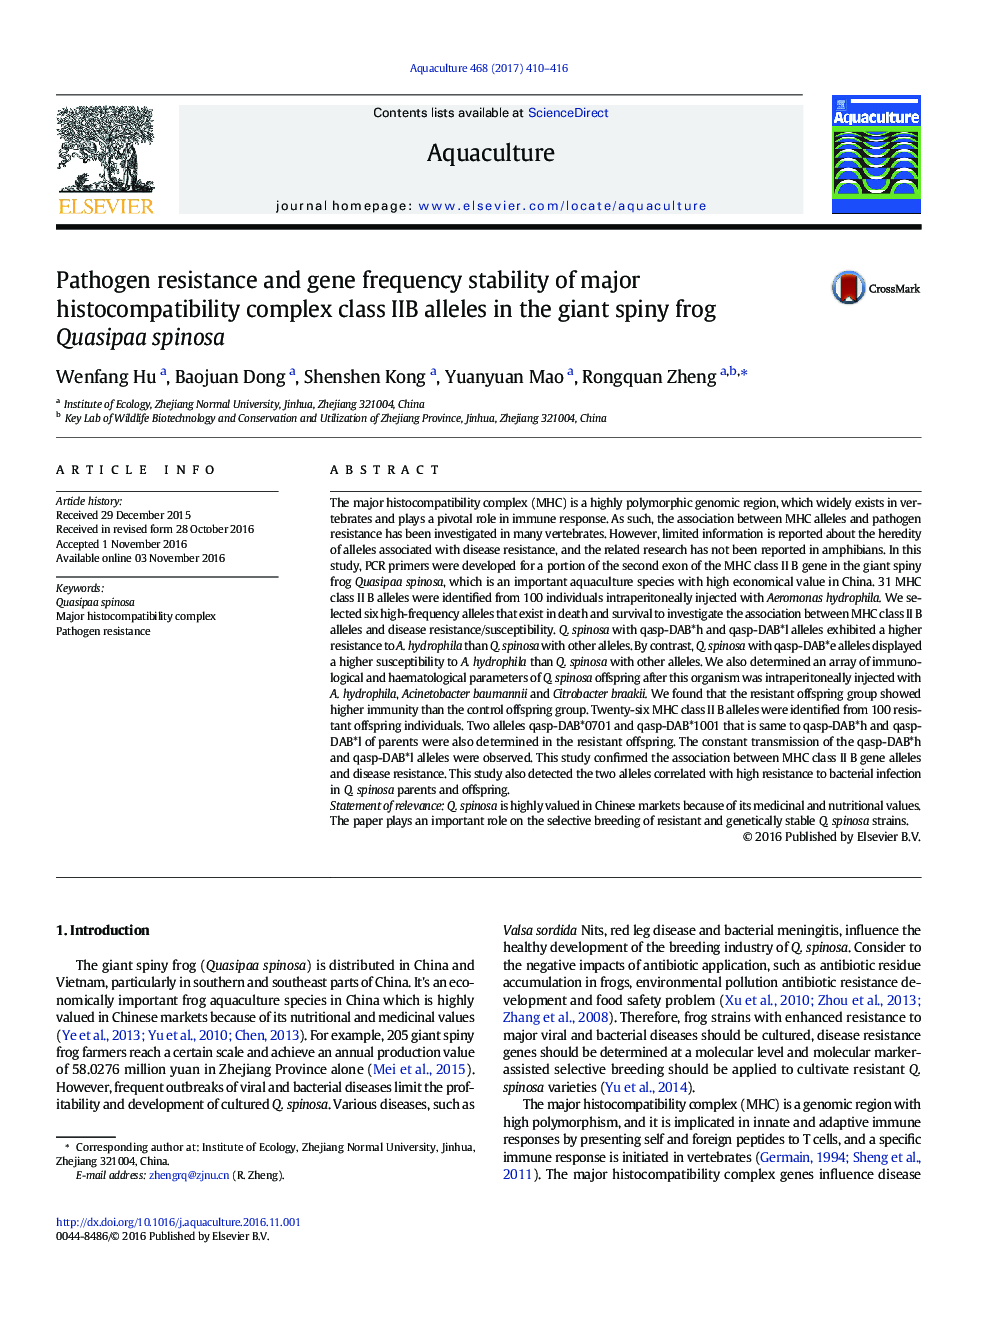 Pathogen resistance and gene frequency stability of major histocompatibility complex class IIB alleles in the giant spiny frog Quasipaa spinosa